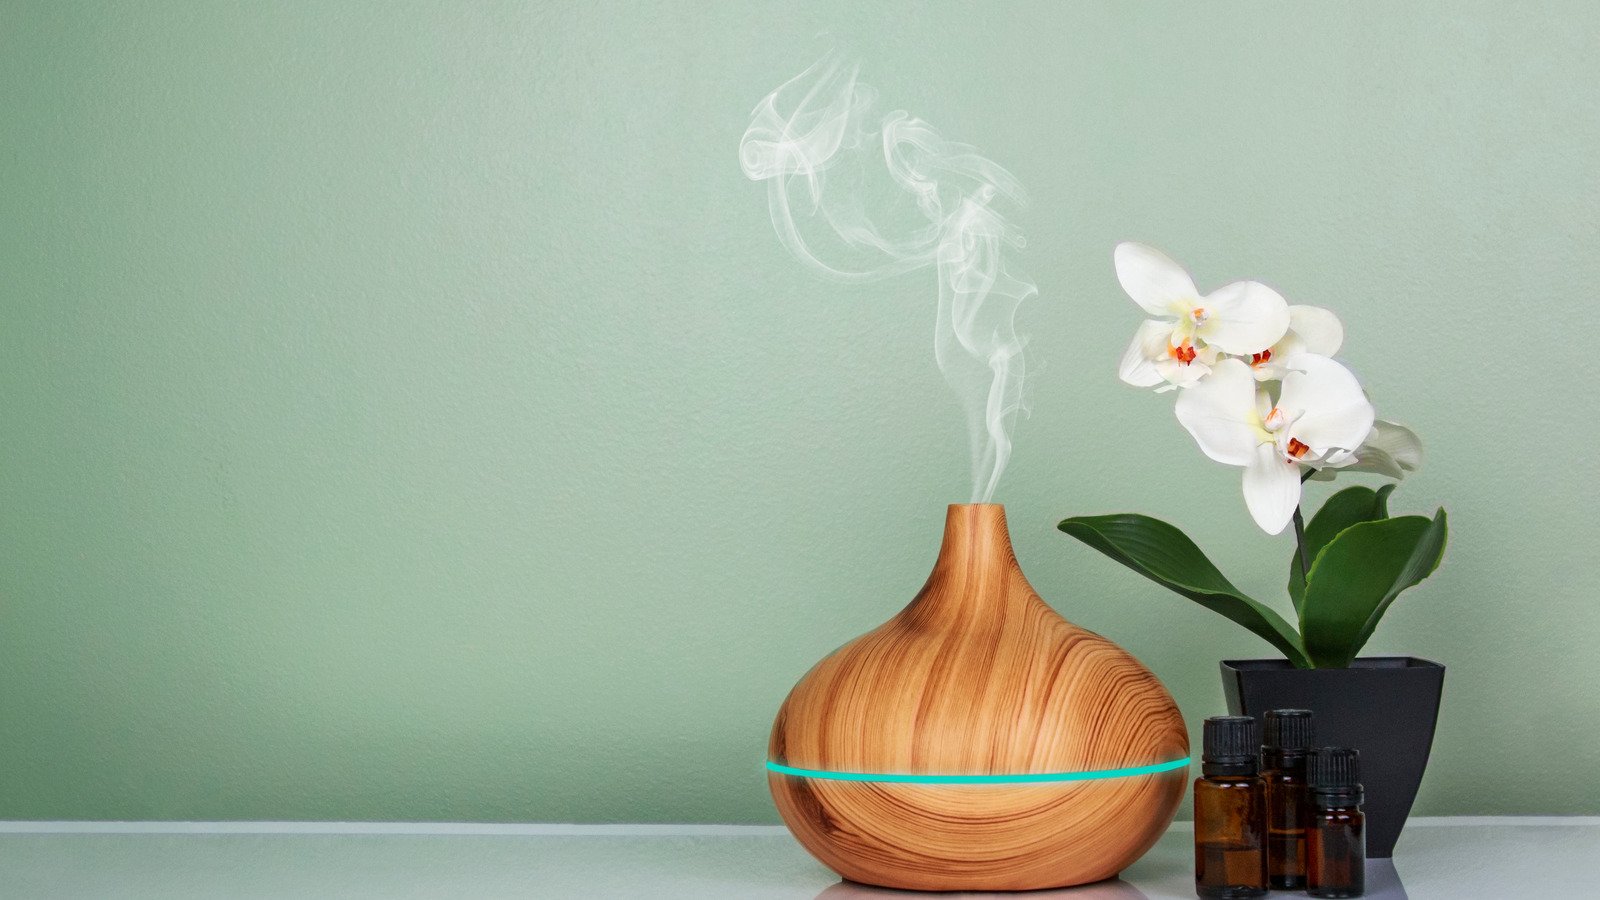 The Most Important Place To Use Air Fresheners That You're Probably Missing